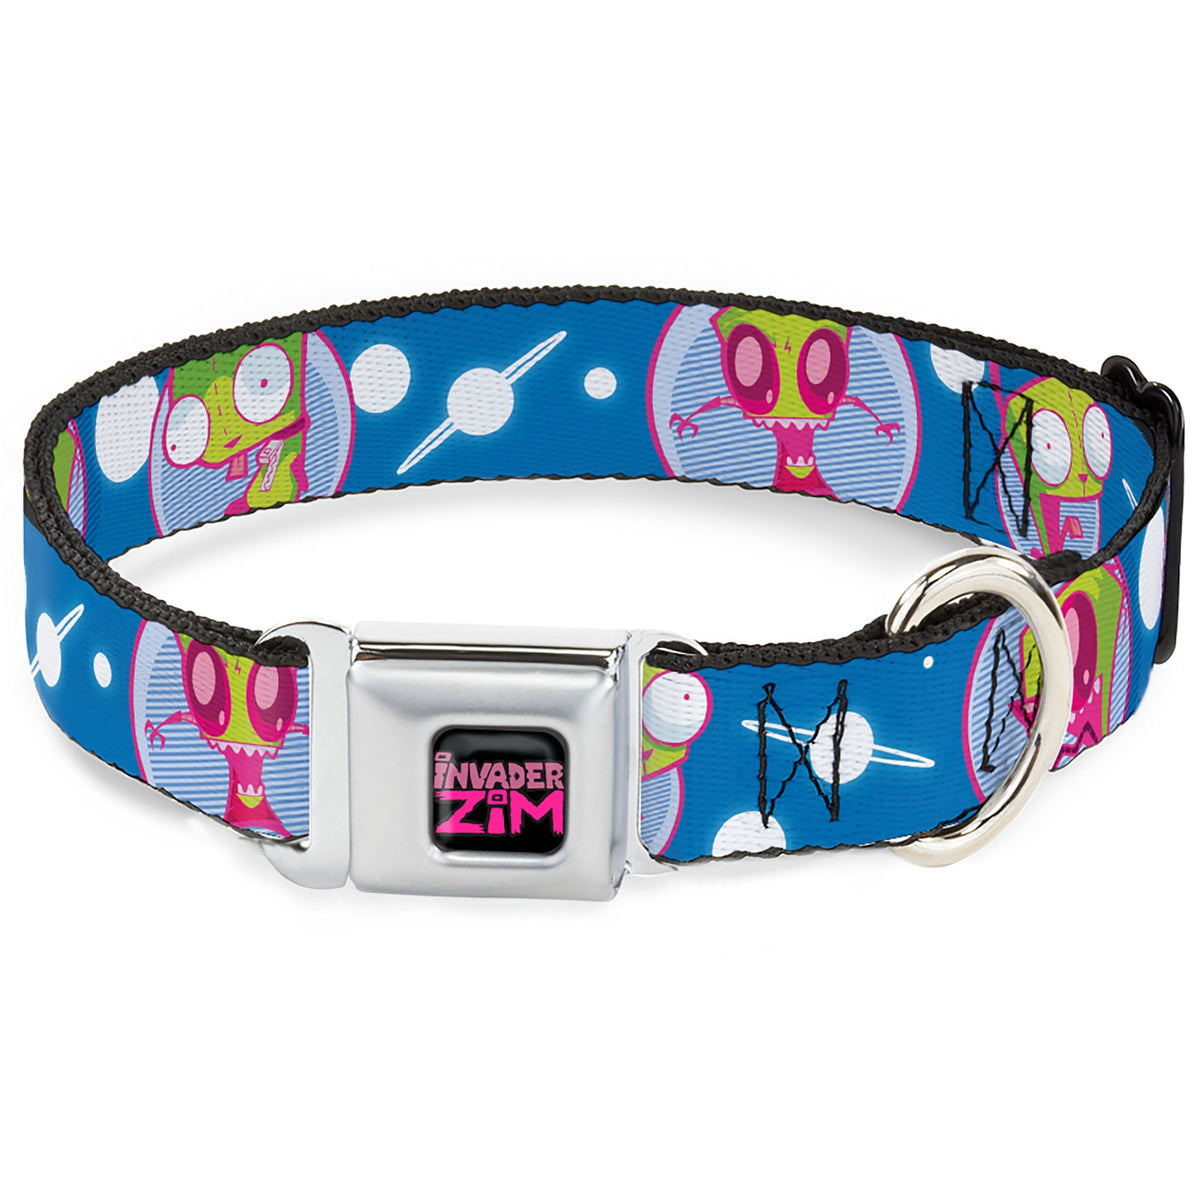 INVADER ZIM Title Logo Full Color Pink/Green Seatbelt Buckle Collar - Invader Zim and GIR Poses and Planets Blue/White